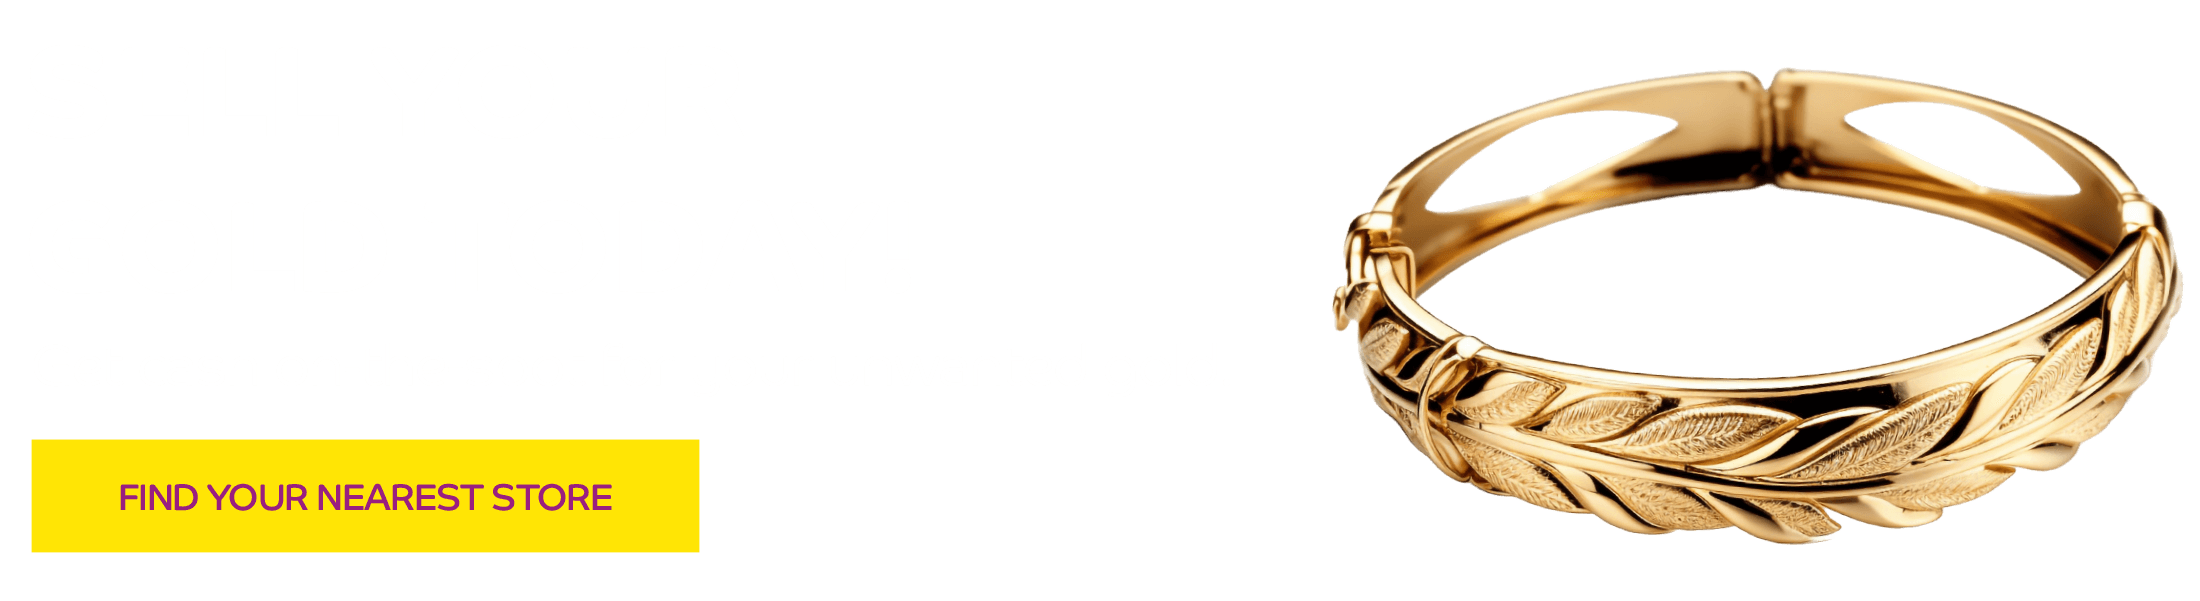 Sell your gold today